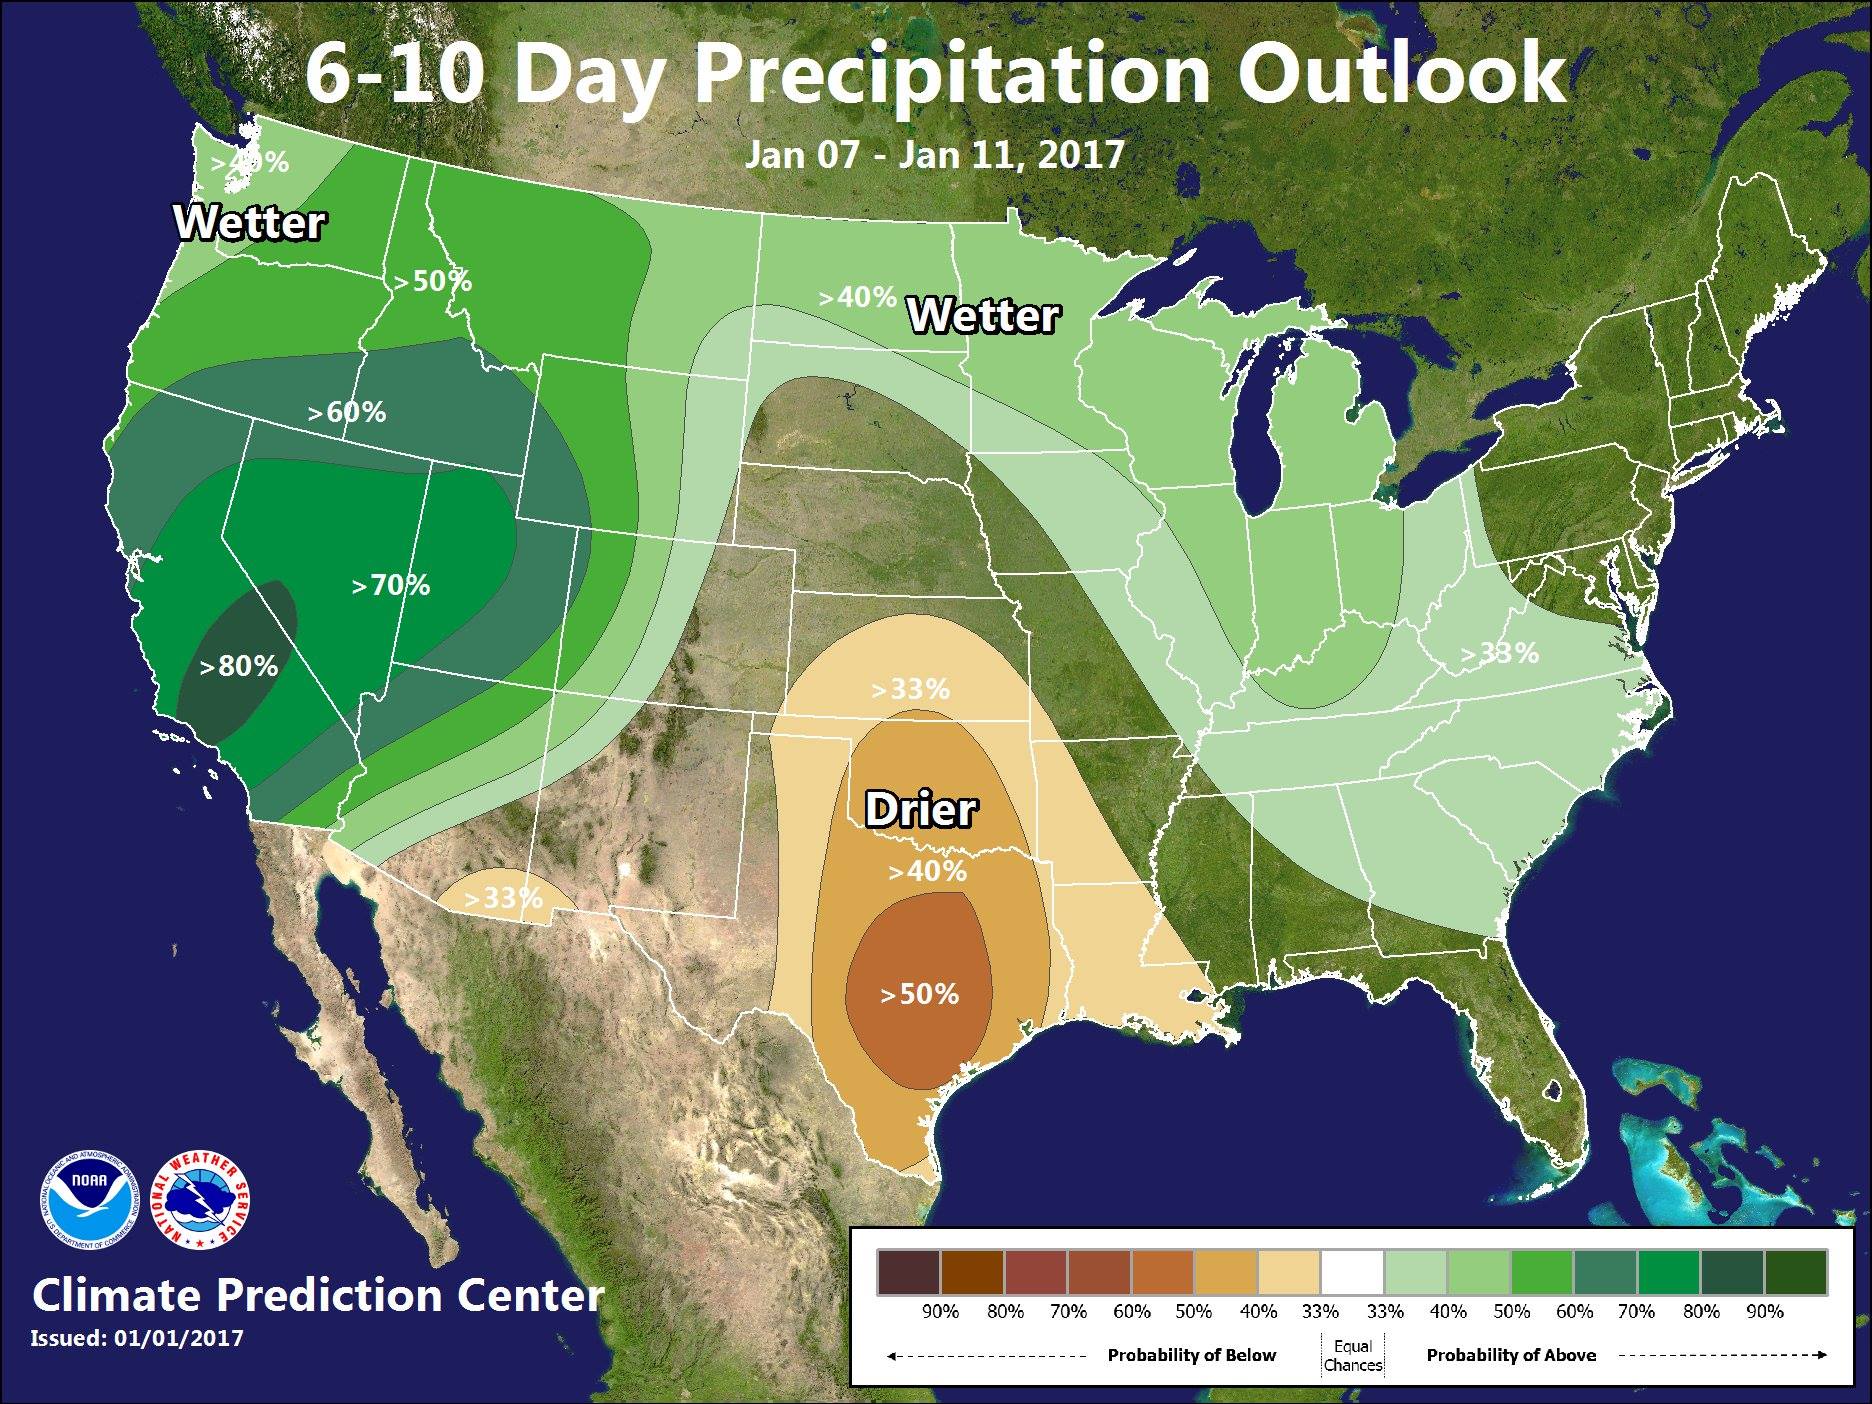 6-10 day outlook looking wet for CA.  image:  noaa, yesterday